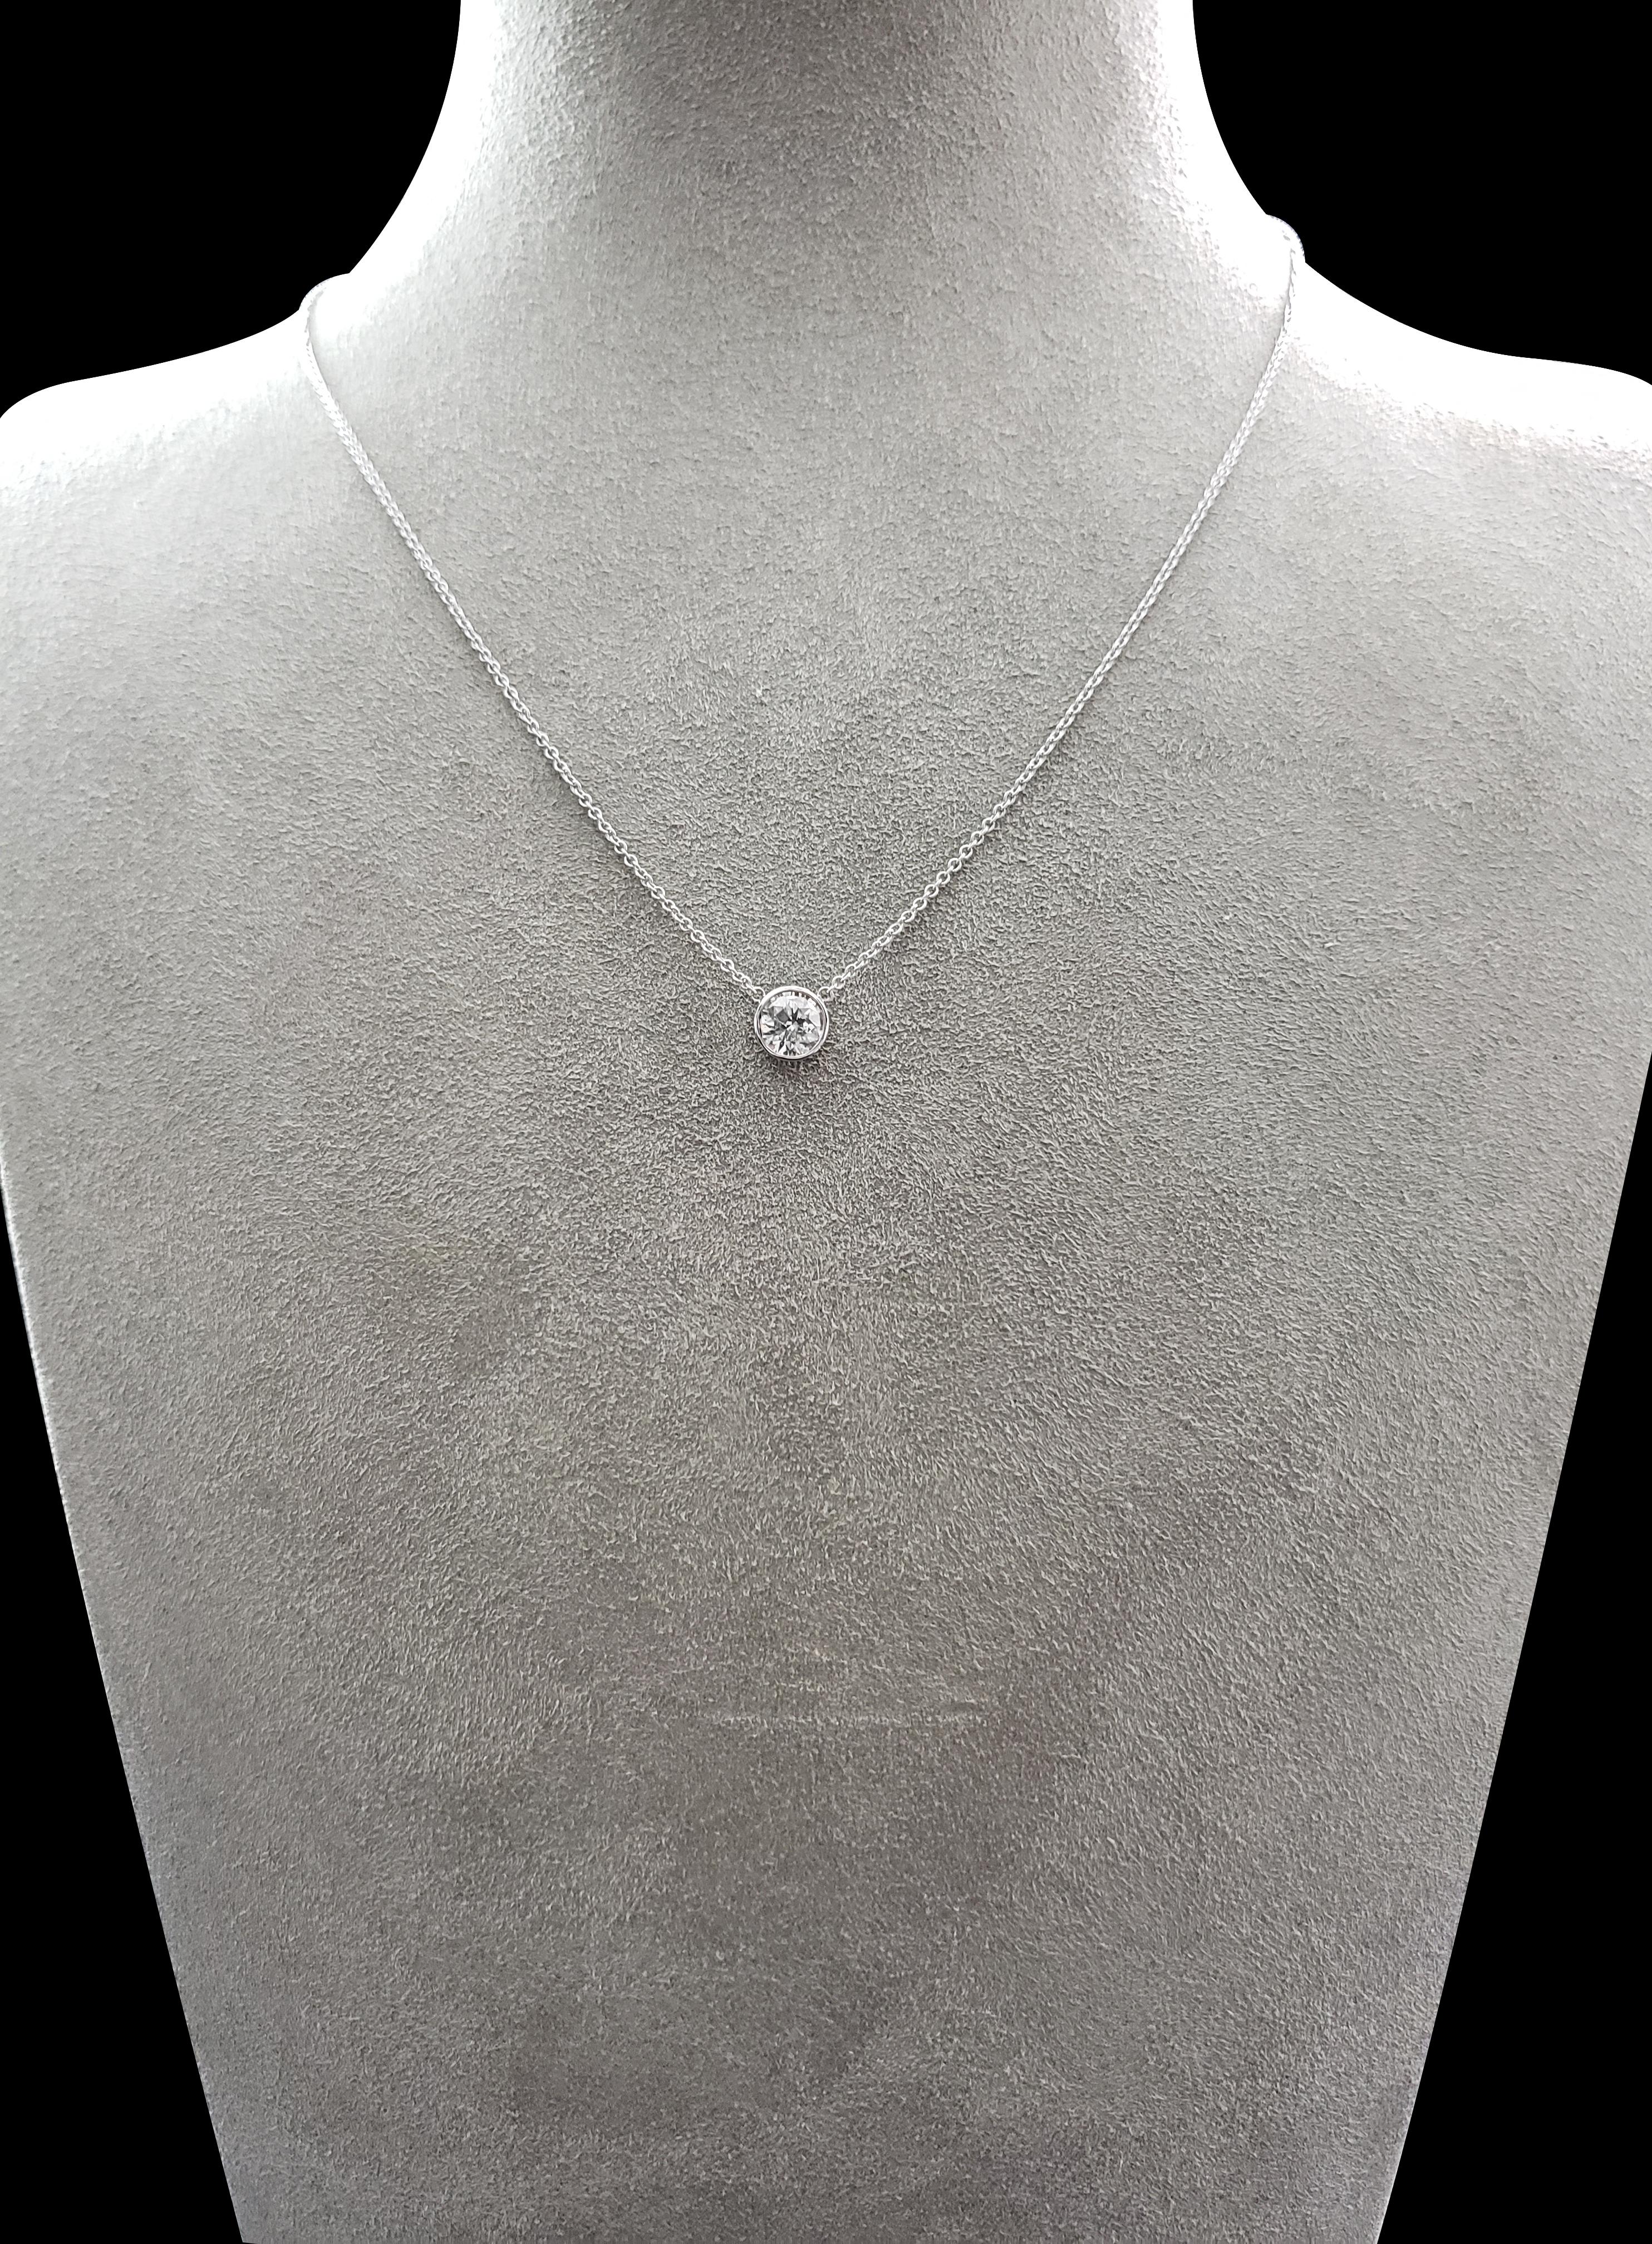 A simple and versatile solitaire pendant necklace showcasing a single round diamond in a 14 karat white gold bezel. Attached to a 16 inch white gold chain. 

Style available in different price ranges. Prices are based on your selection of the 4C’s